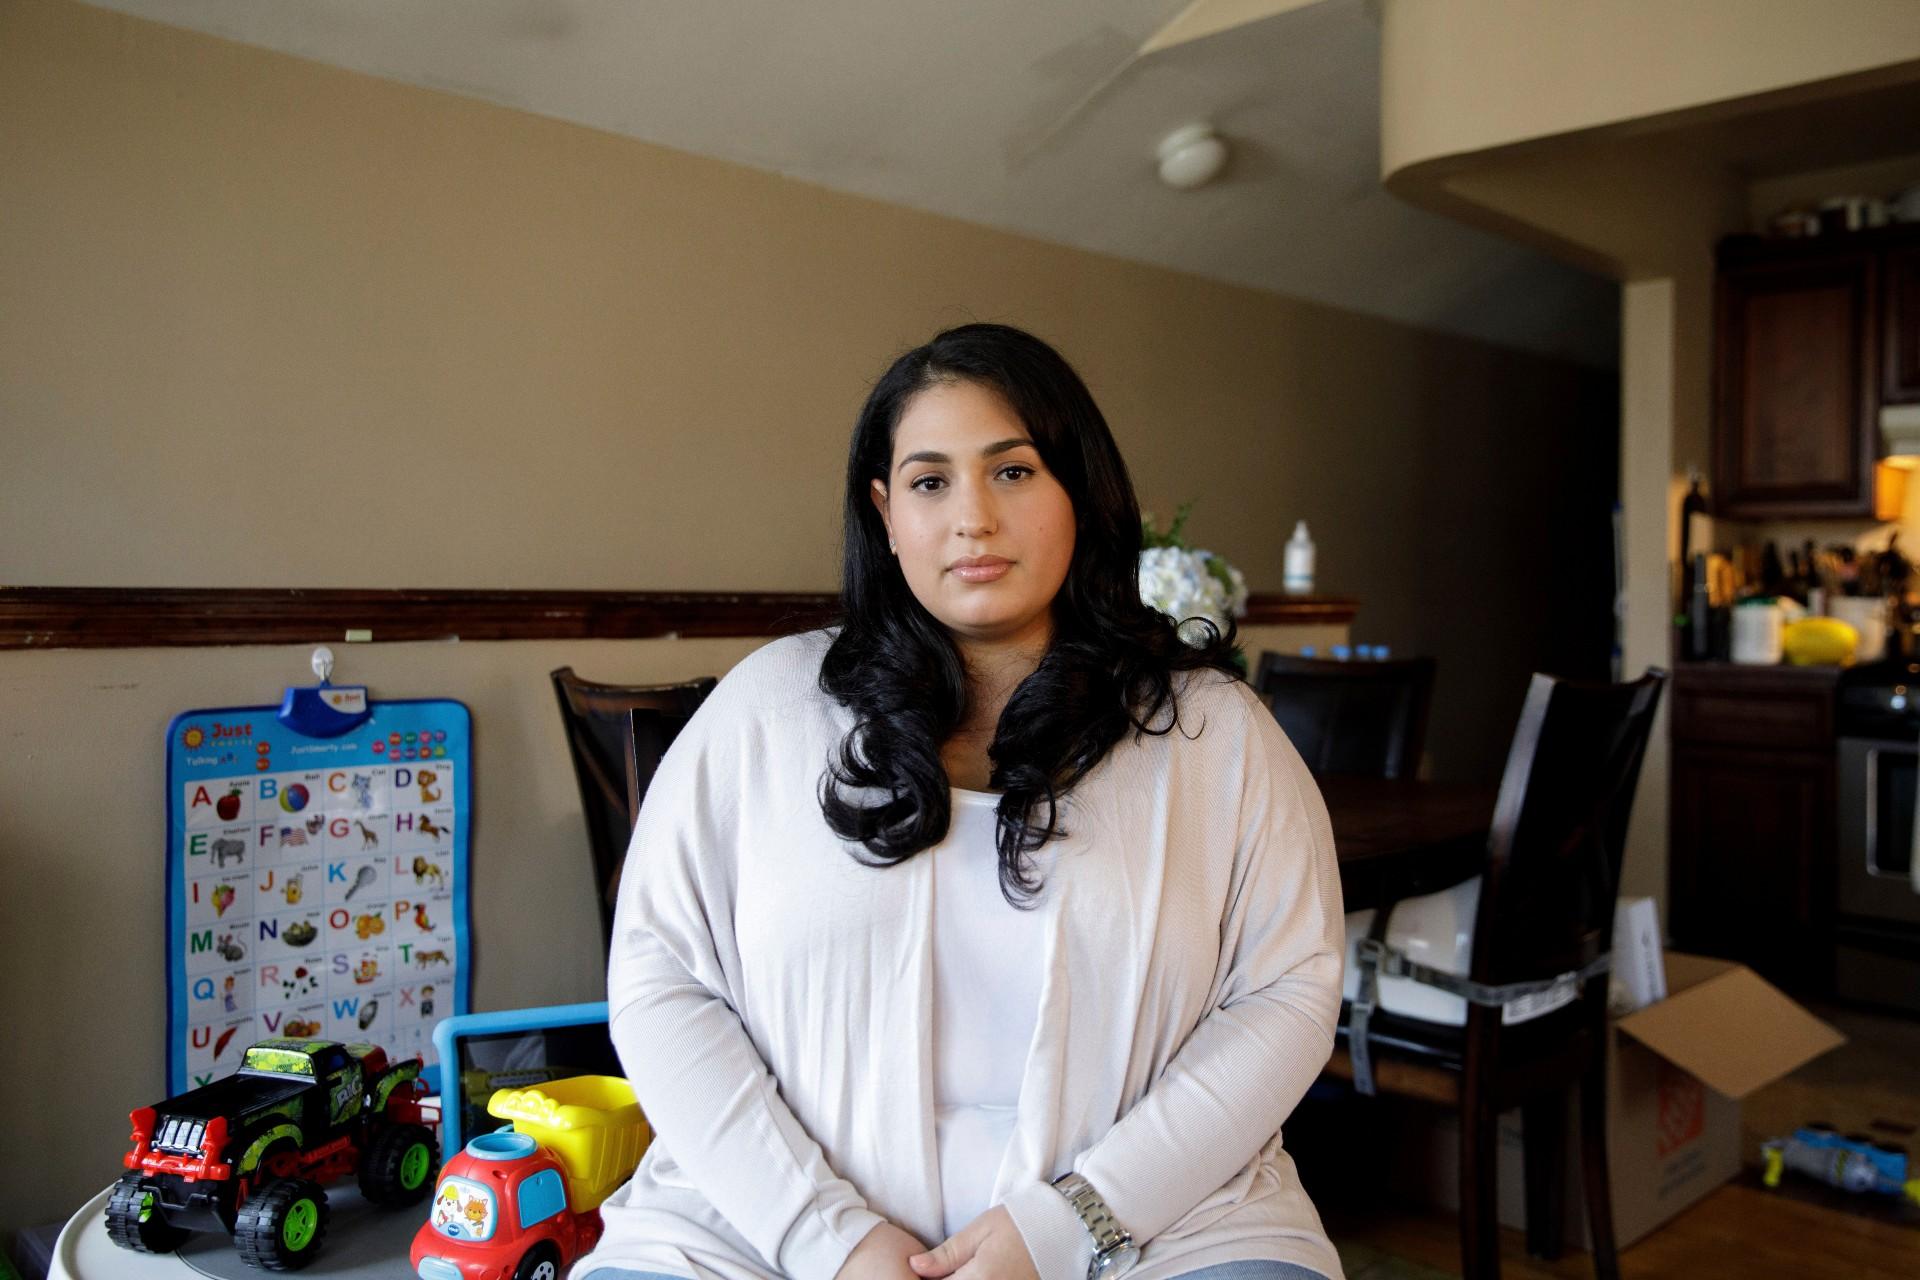 Priscilla Medina poses for a portrait in her home in Queens in New York on Wednesday, April 7, 2021. (AP Photo / Marshall Ritzel)